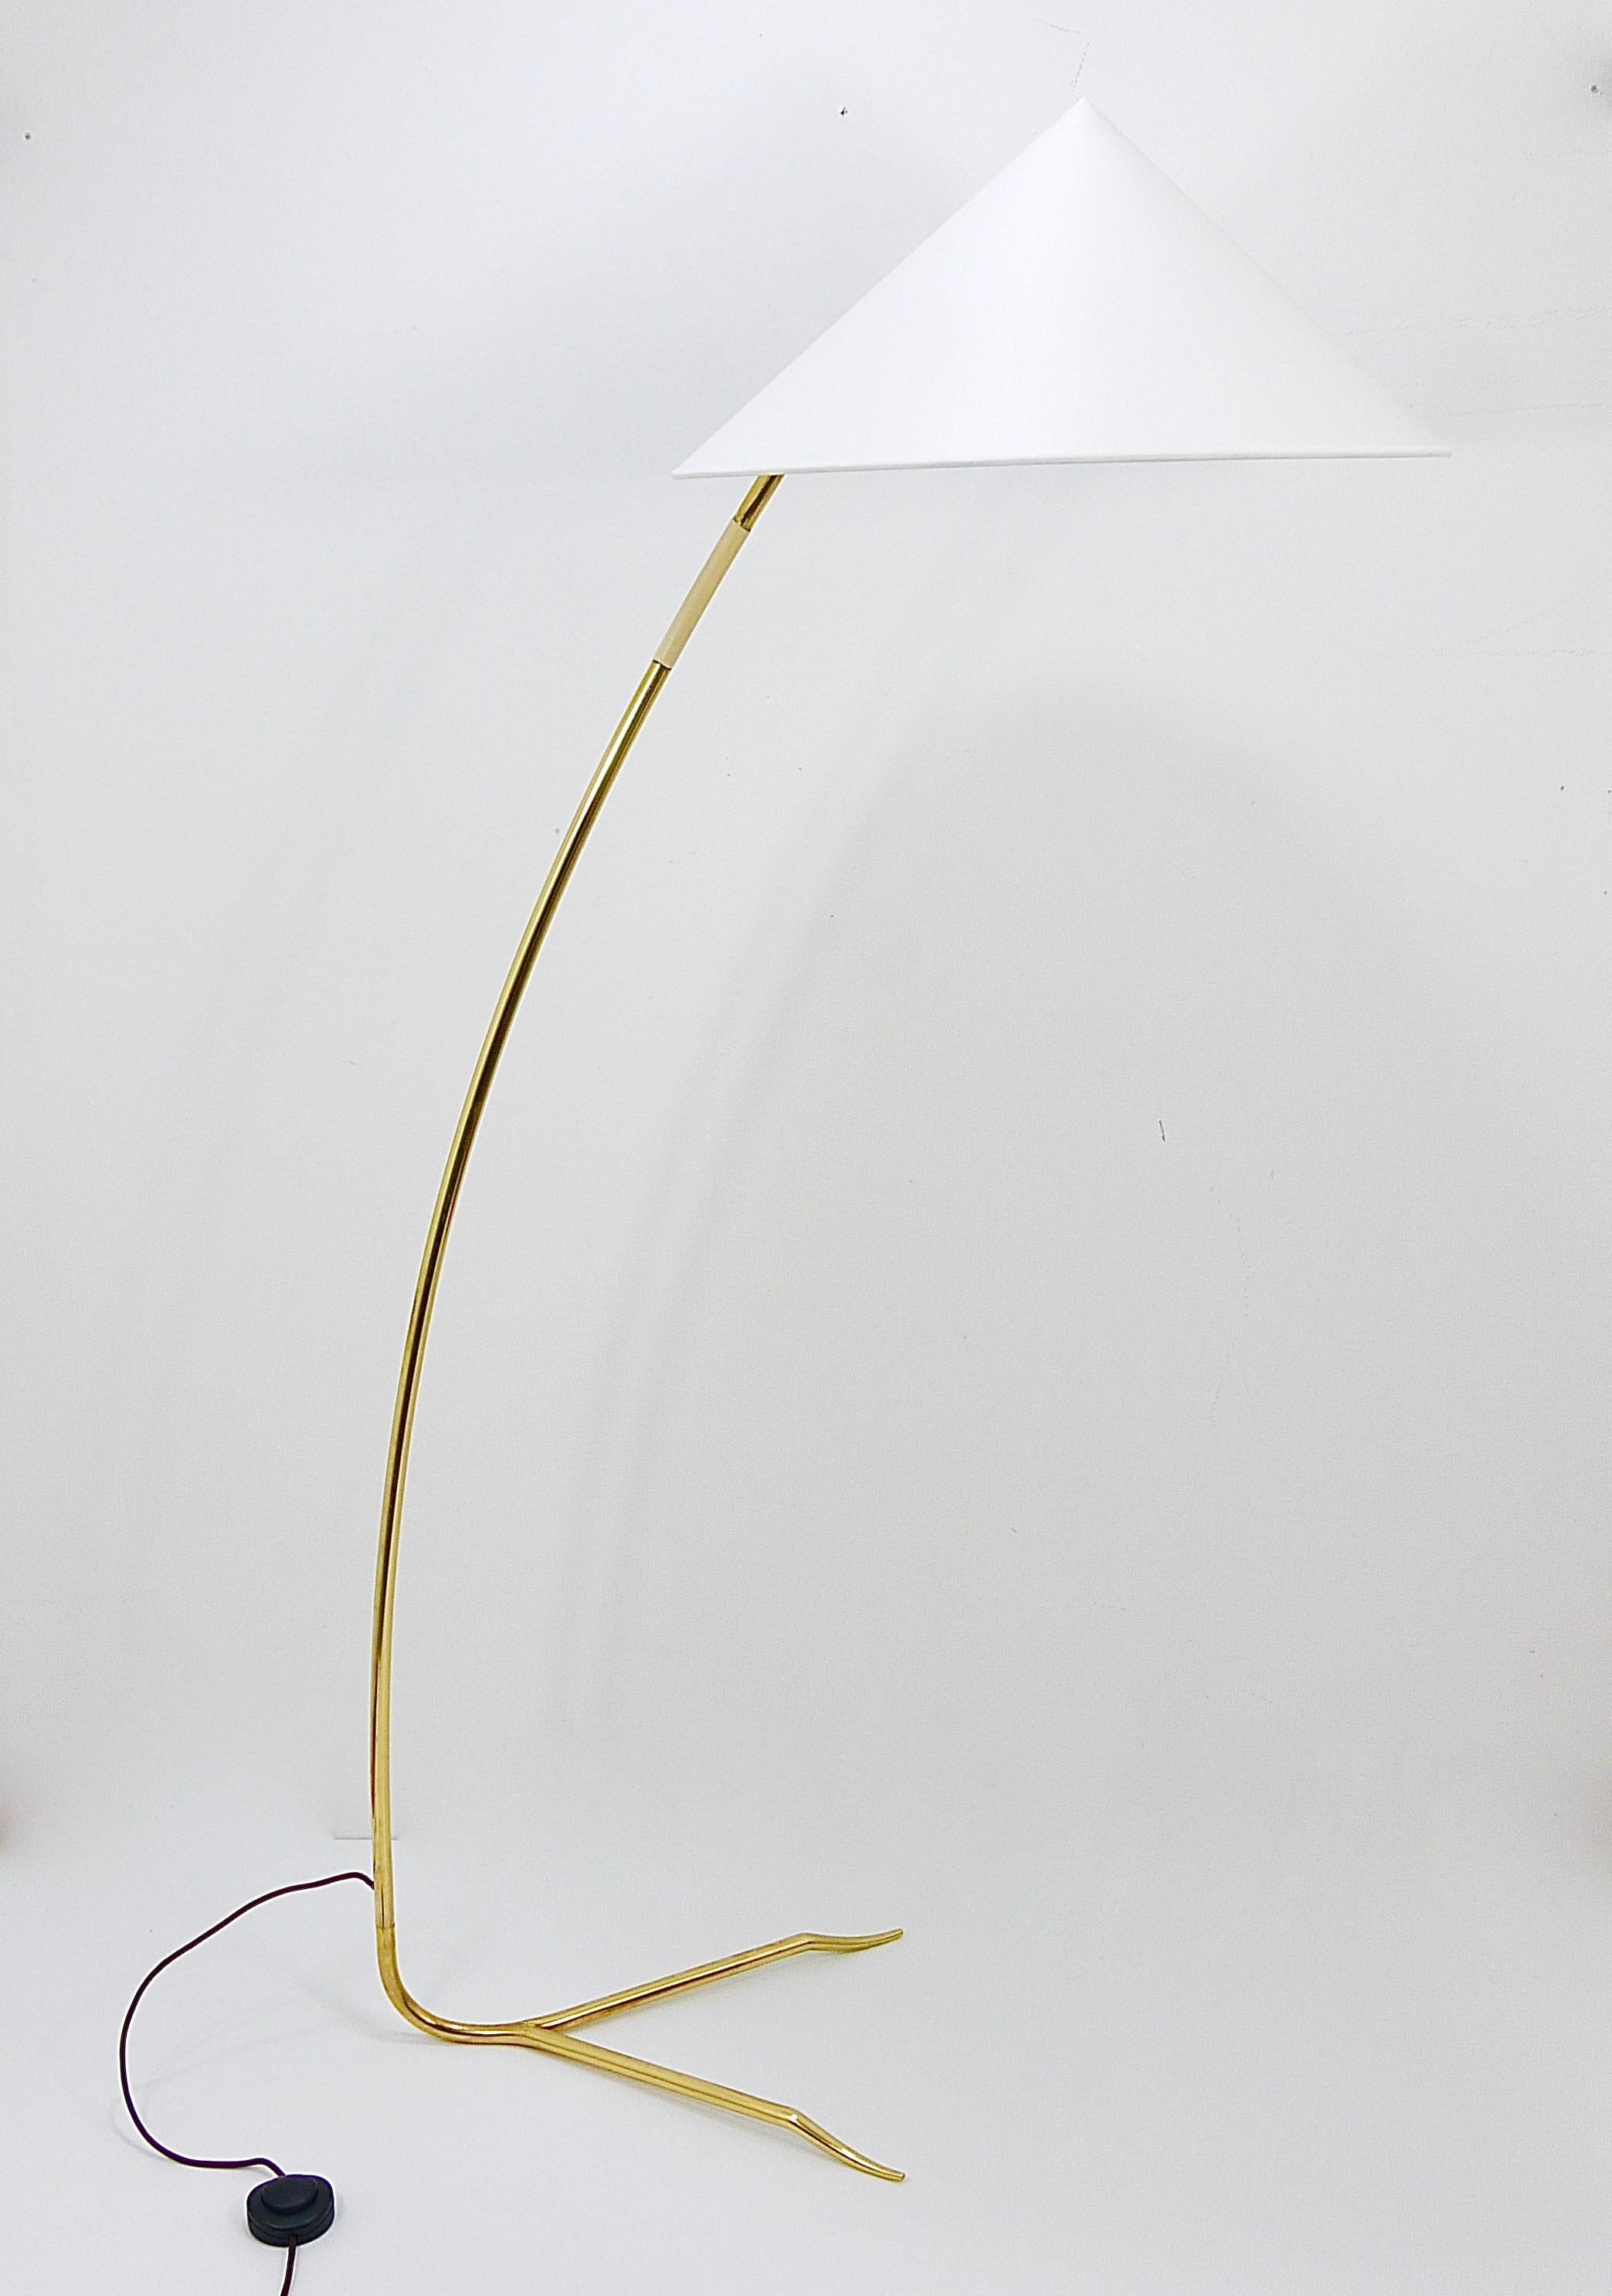 An elegant and exquisite Austrian Mid-Century floor lamp dating back to the 1950s, designed and crafted by Rupert Nikoll Vienna. This beautiful vintage piece features a gracefully curved brass brass stem with an ivory handle and an exceptionally